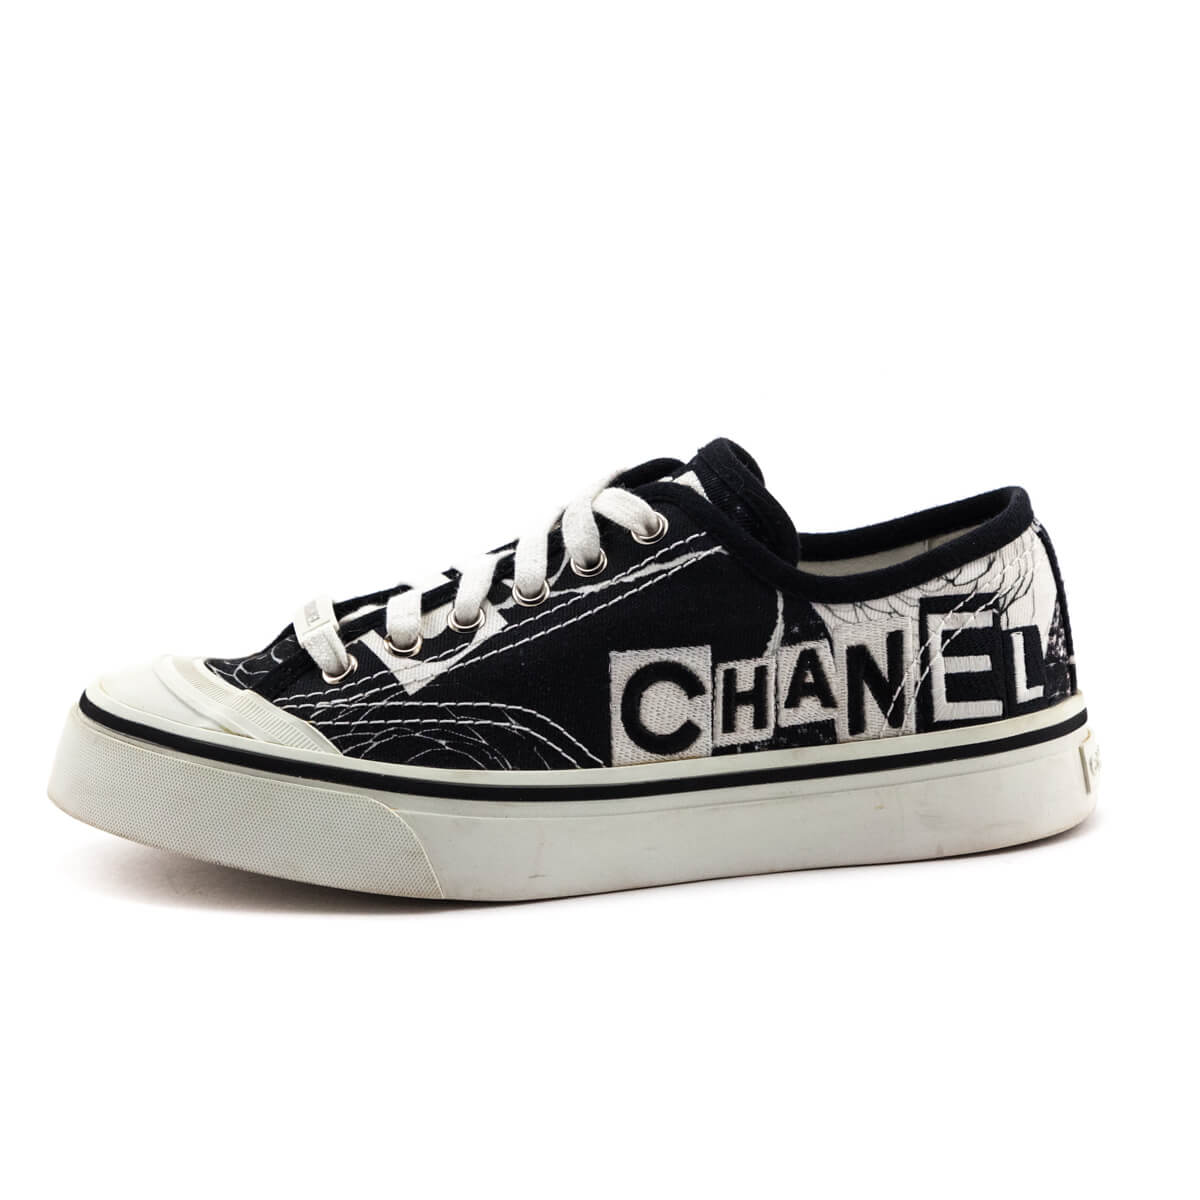 Chanel Black & White Canvas Printed Low Top Sneakers Size US 6.5 | EU 36.5 - Love that Bag etc - Preowned Authentic Designer Handbags & Preloved Fashions